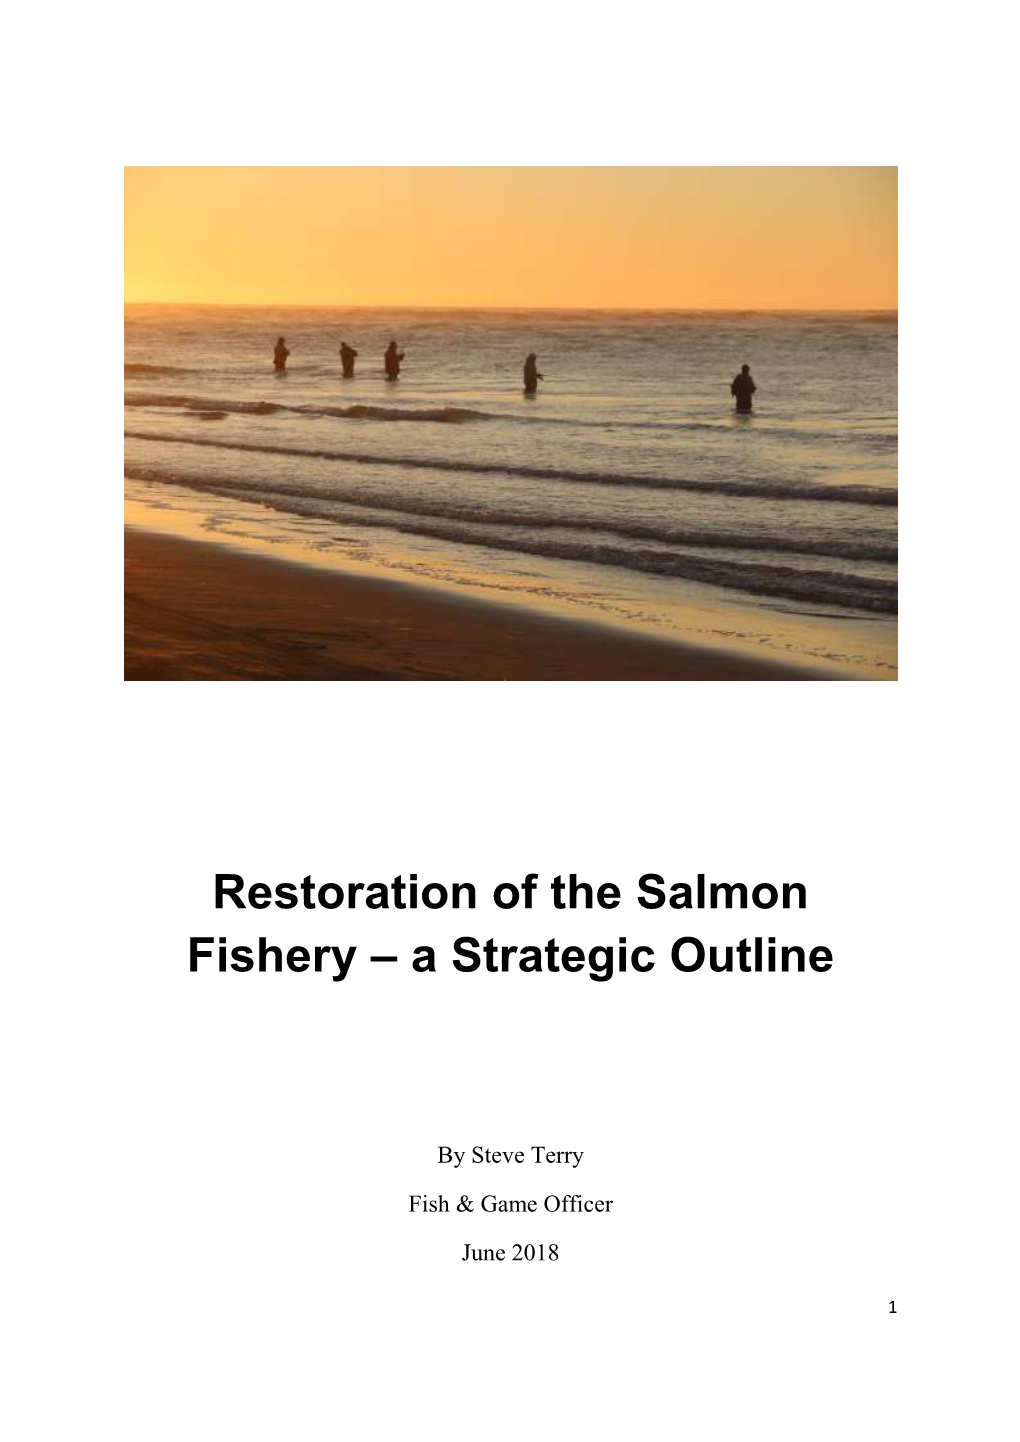 Restoration of the Salmon Fishery – a Strategic Outline